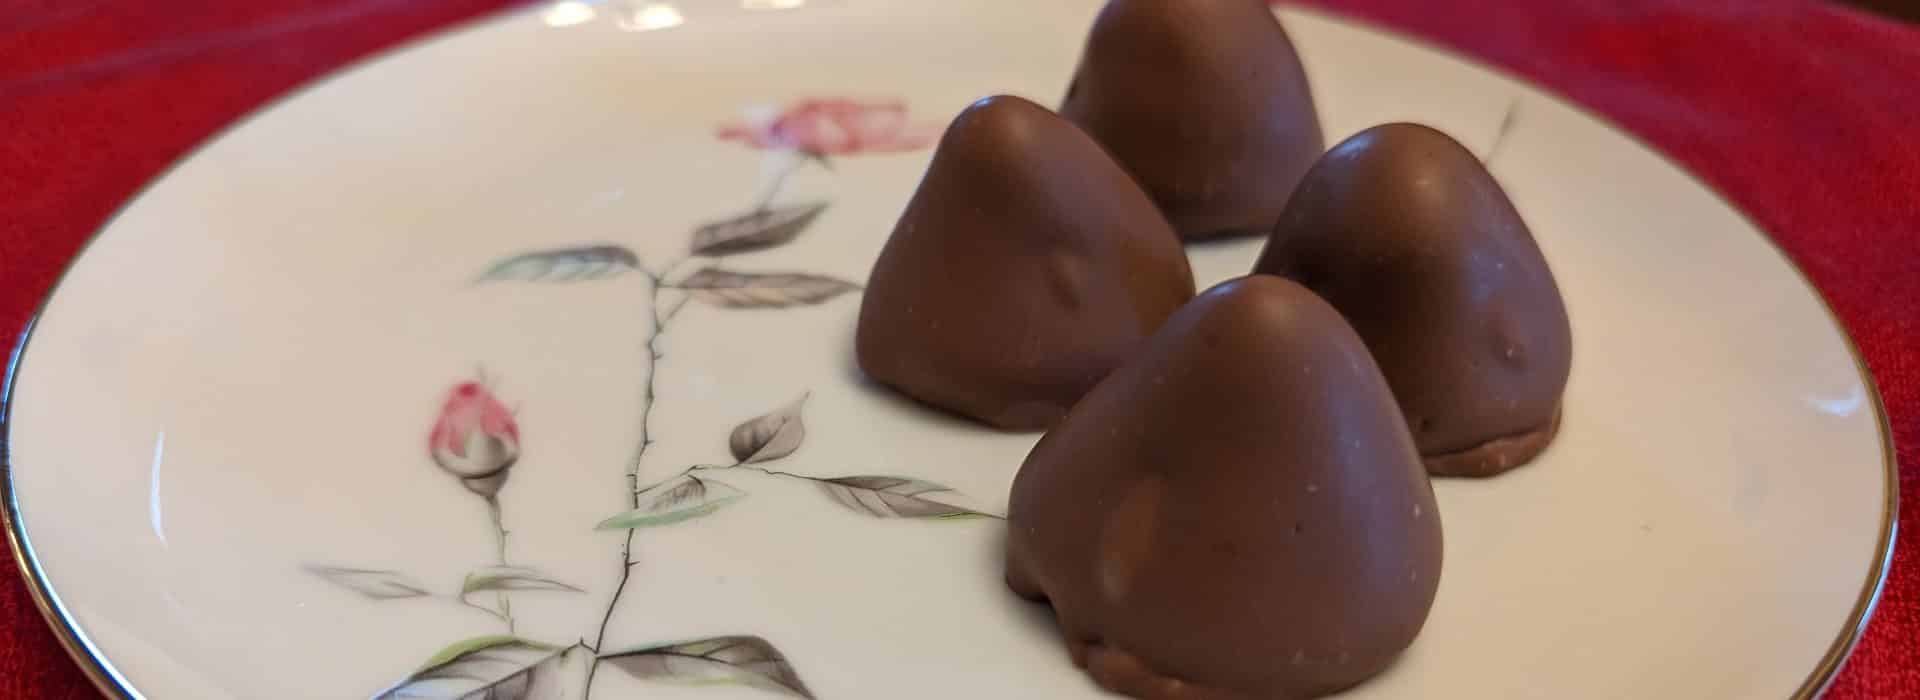 Close up view of chocolate covered strawberries on a white porcelain plate